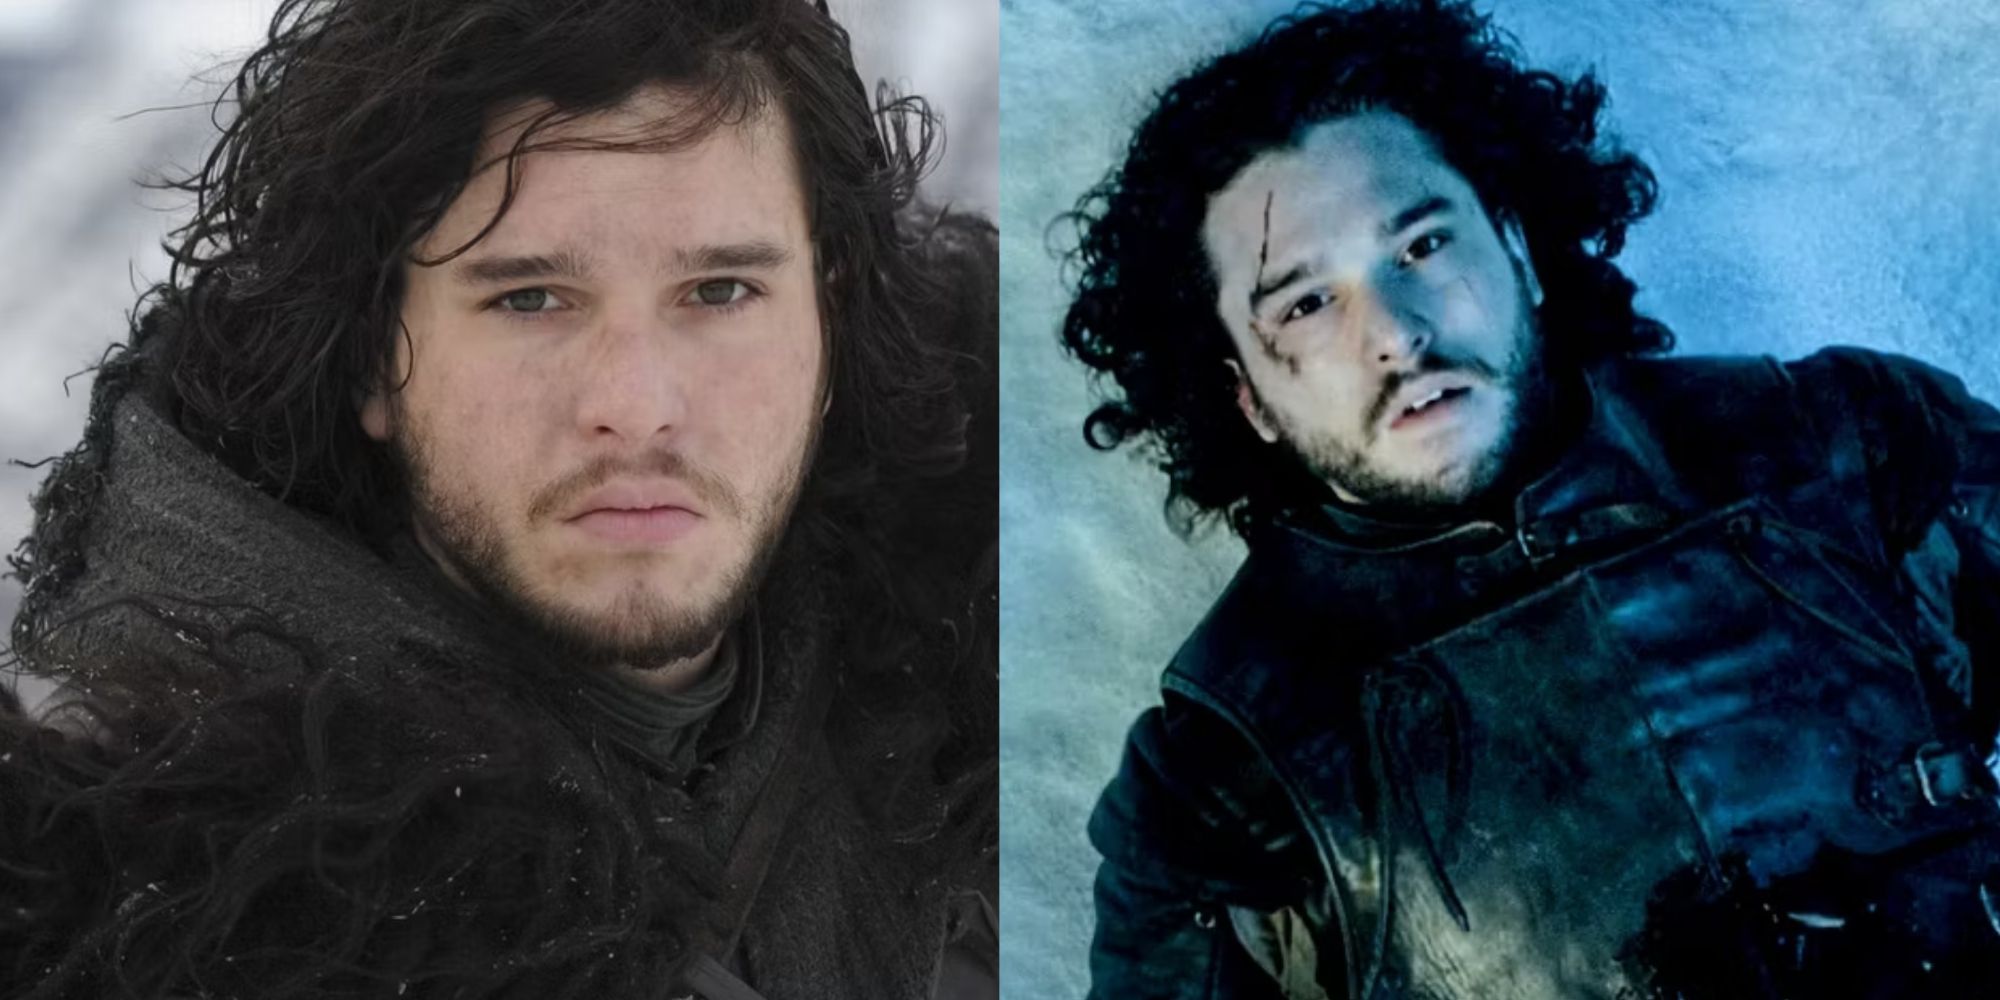 Split image of Jon Snow looking serious and lying dead in Game of Thrones